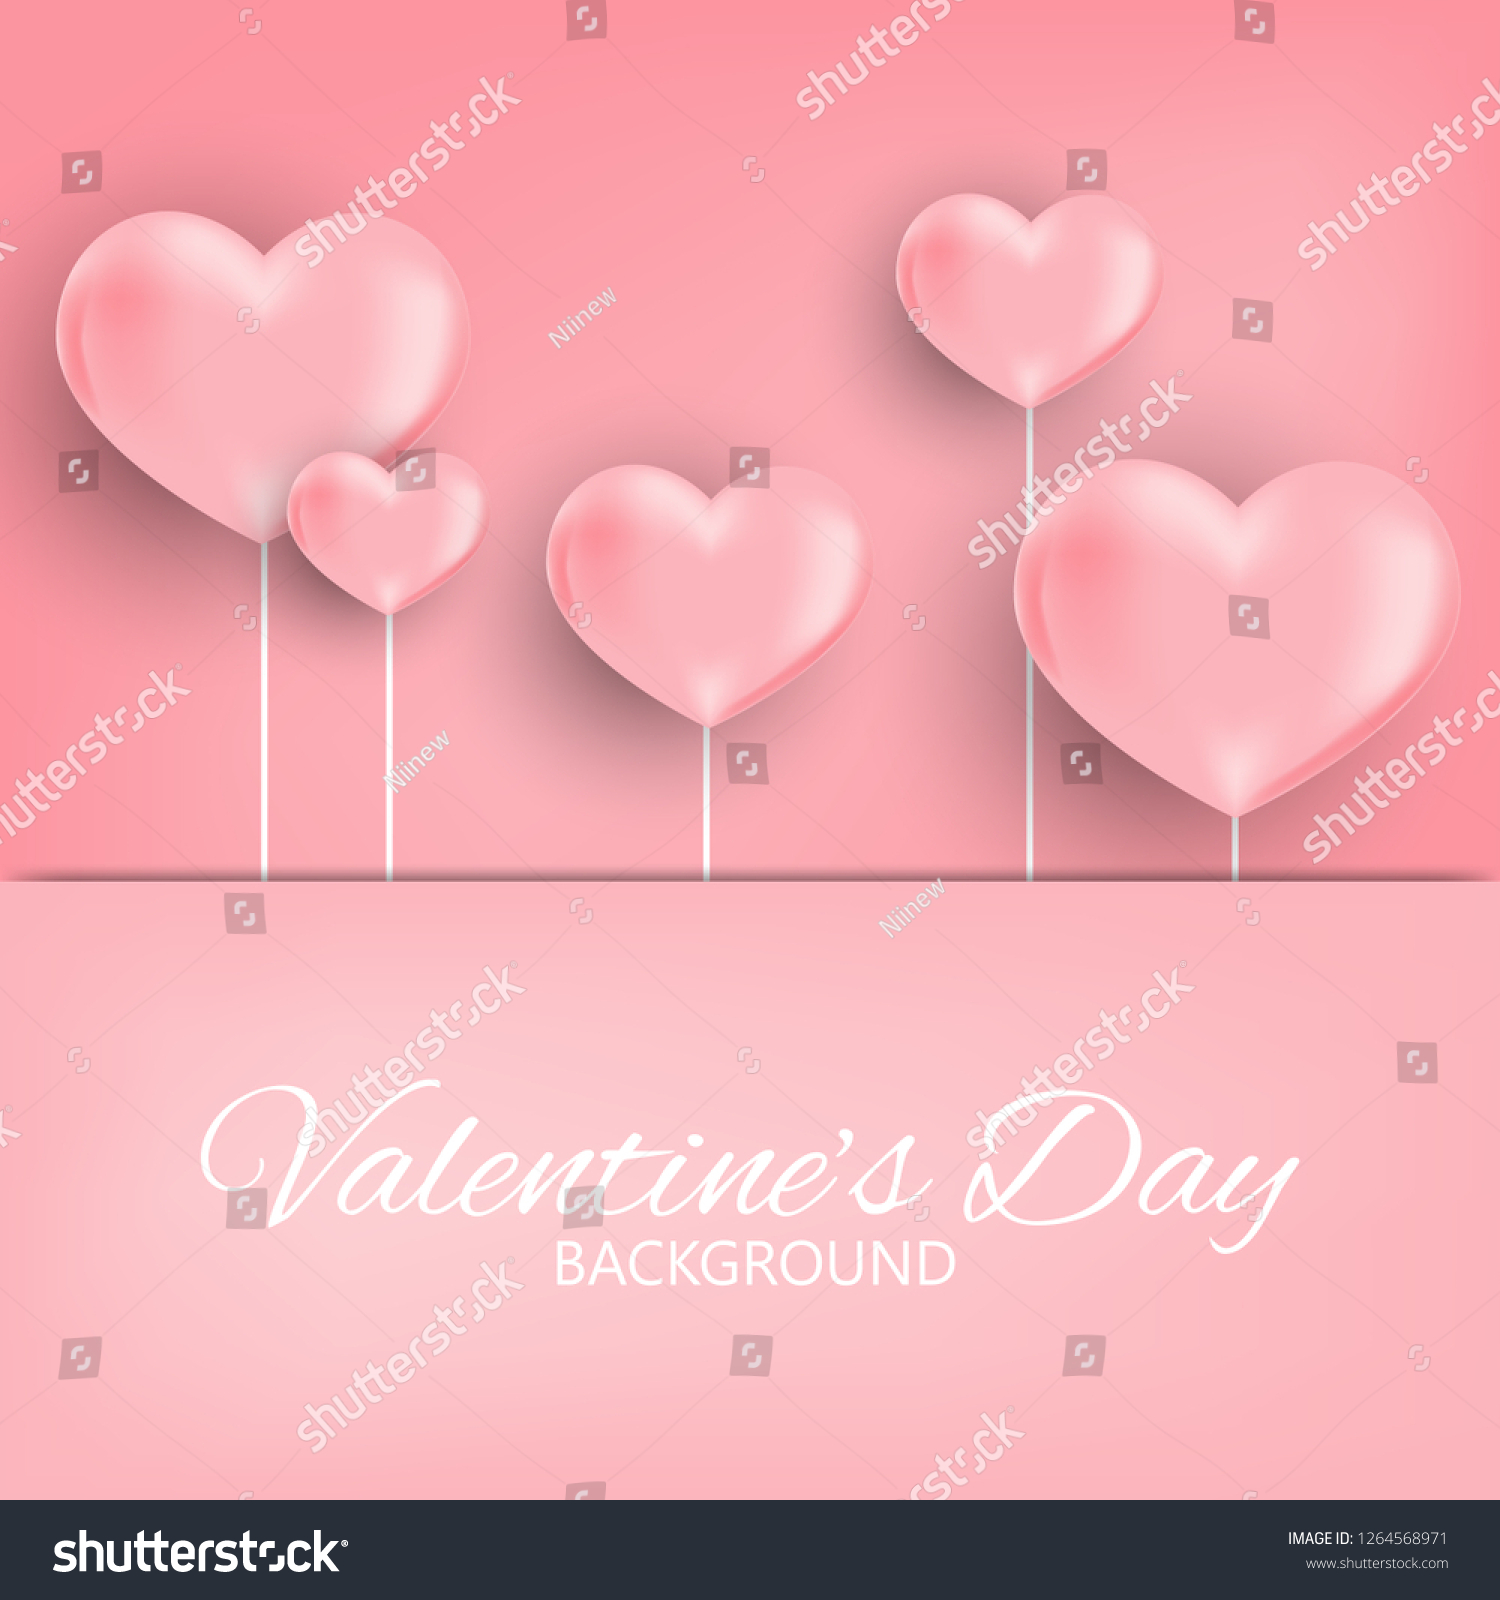 Valentine's day background of a group of pink heart tree with light pink frame for your copy space. Design for Invitation to party or greeting card or banner. Vector illustration. #1264568971